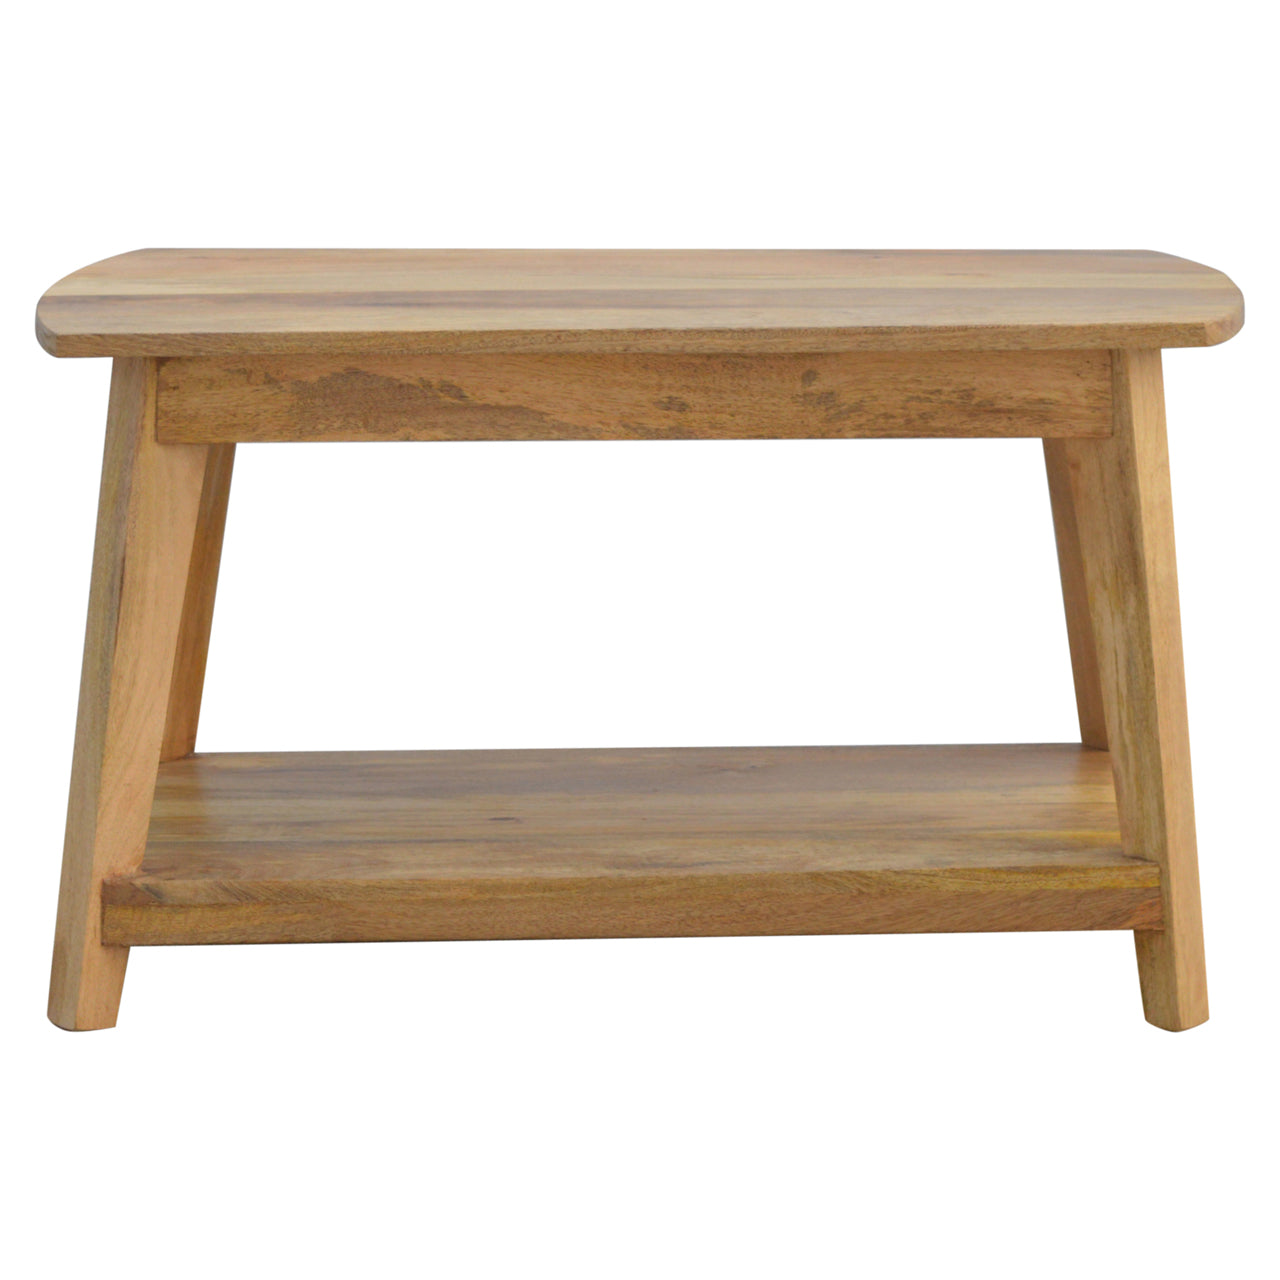 View Coffee Table with Undershelf information